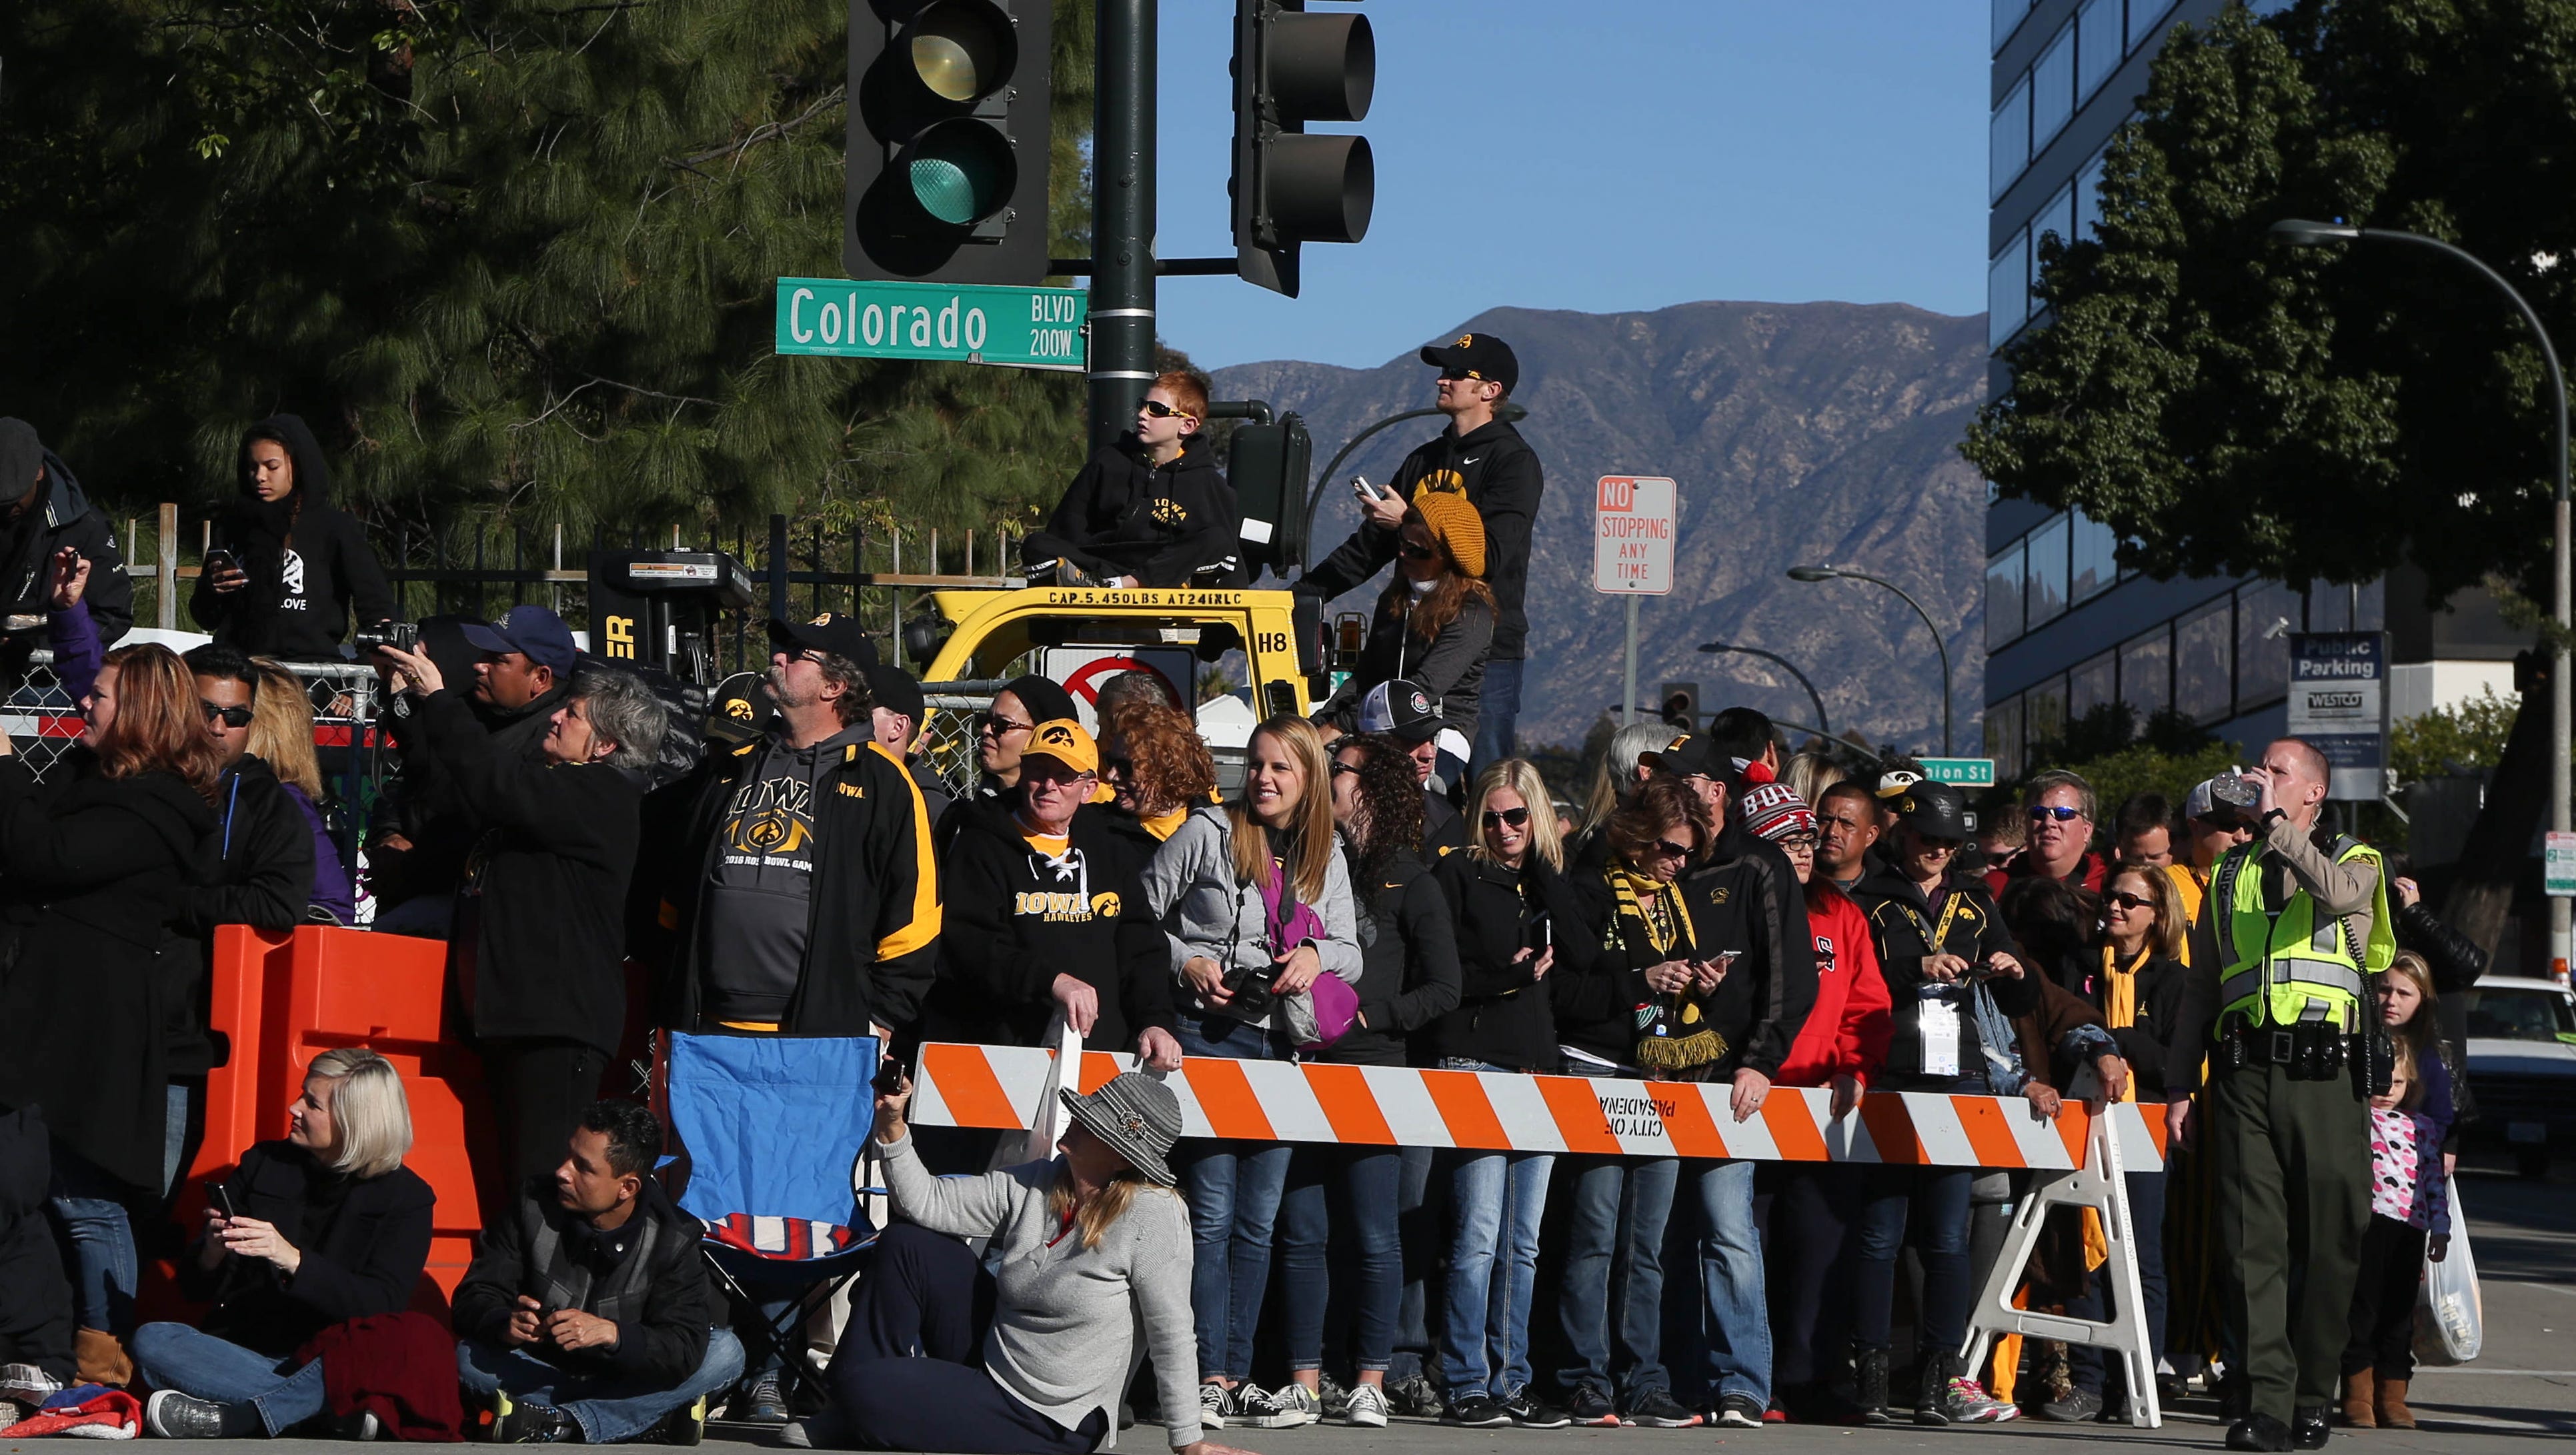 Iowa fans line up along Colorado Blvd. on Friday, Jan. 1, 2016, during the 2016 Tournament of Roses Parade in Pasadena, Calif.